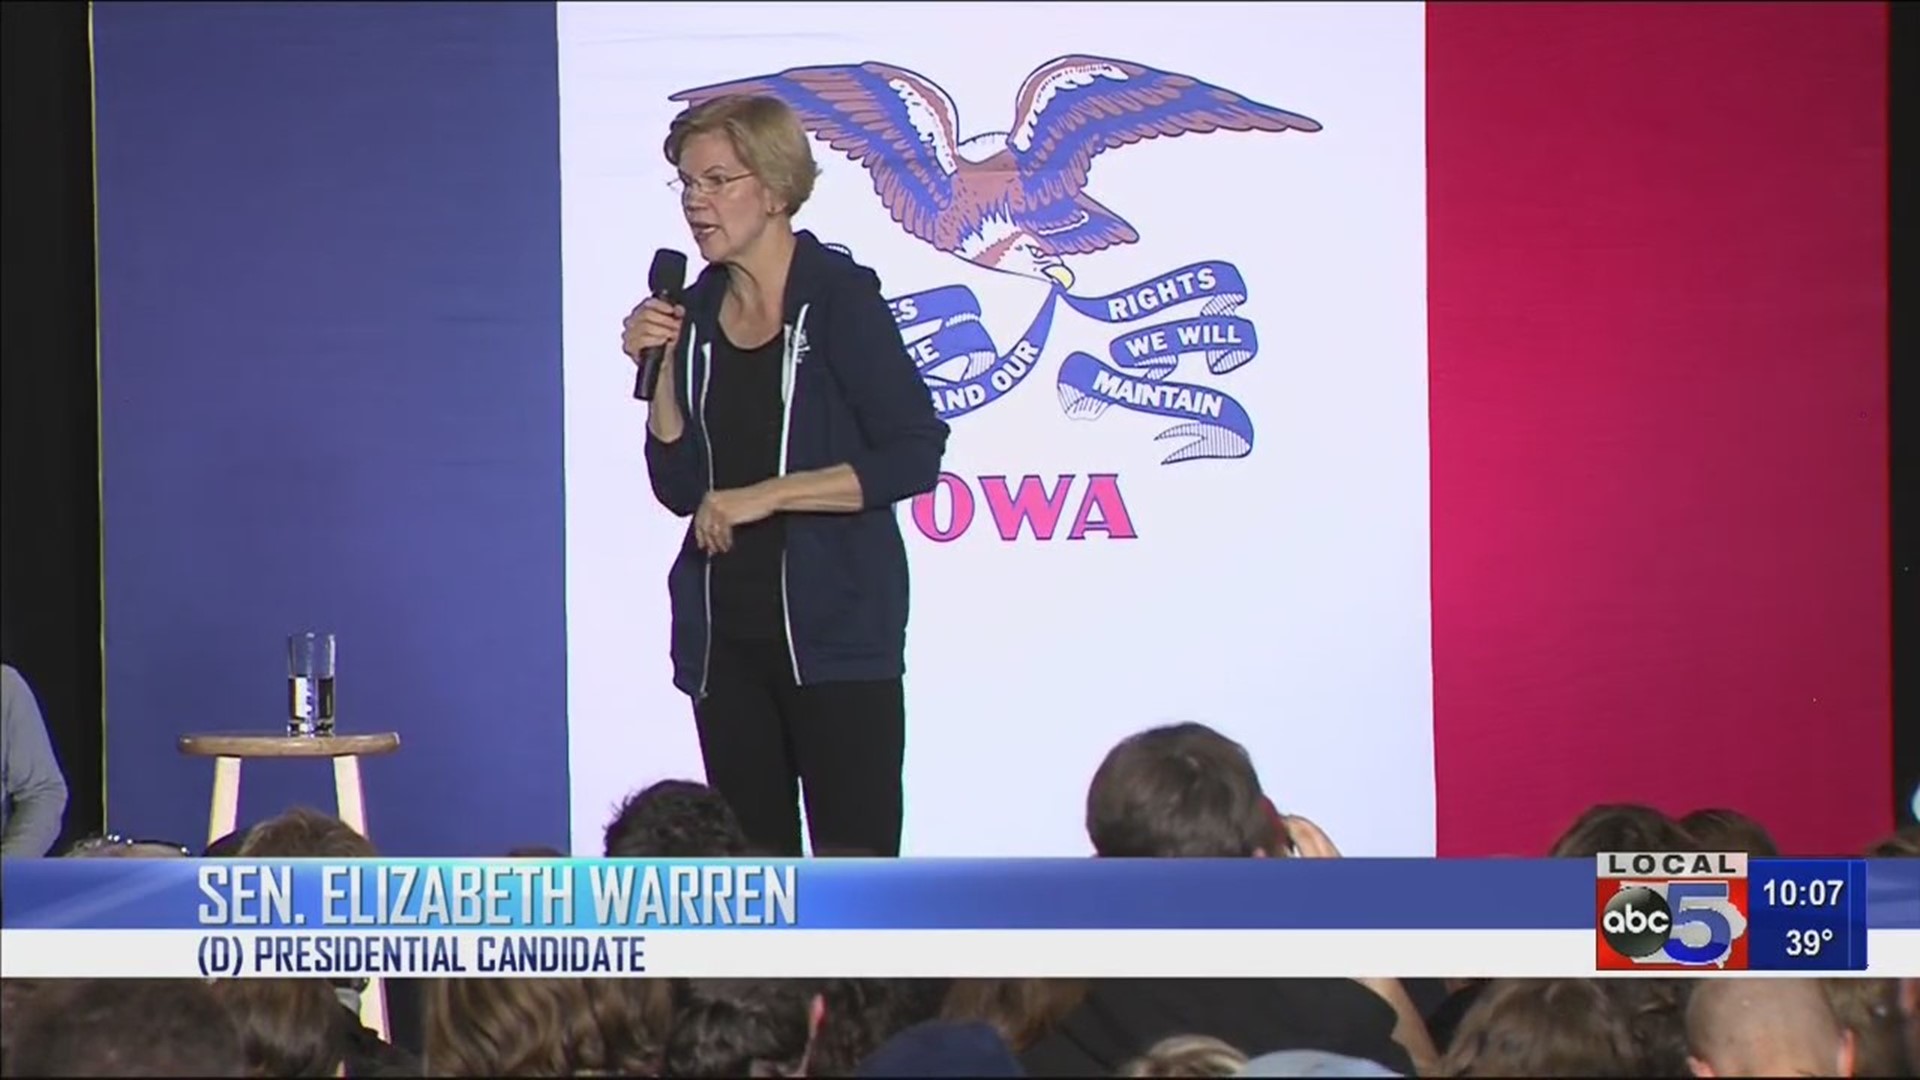 Undecided voters in West Des Moines wanting answers from Sen. Warren